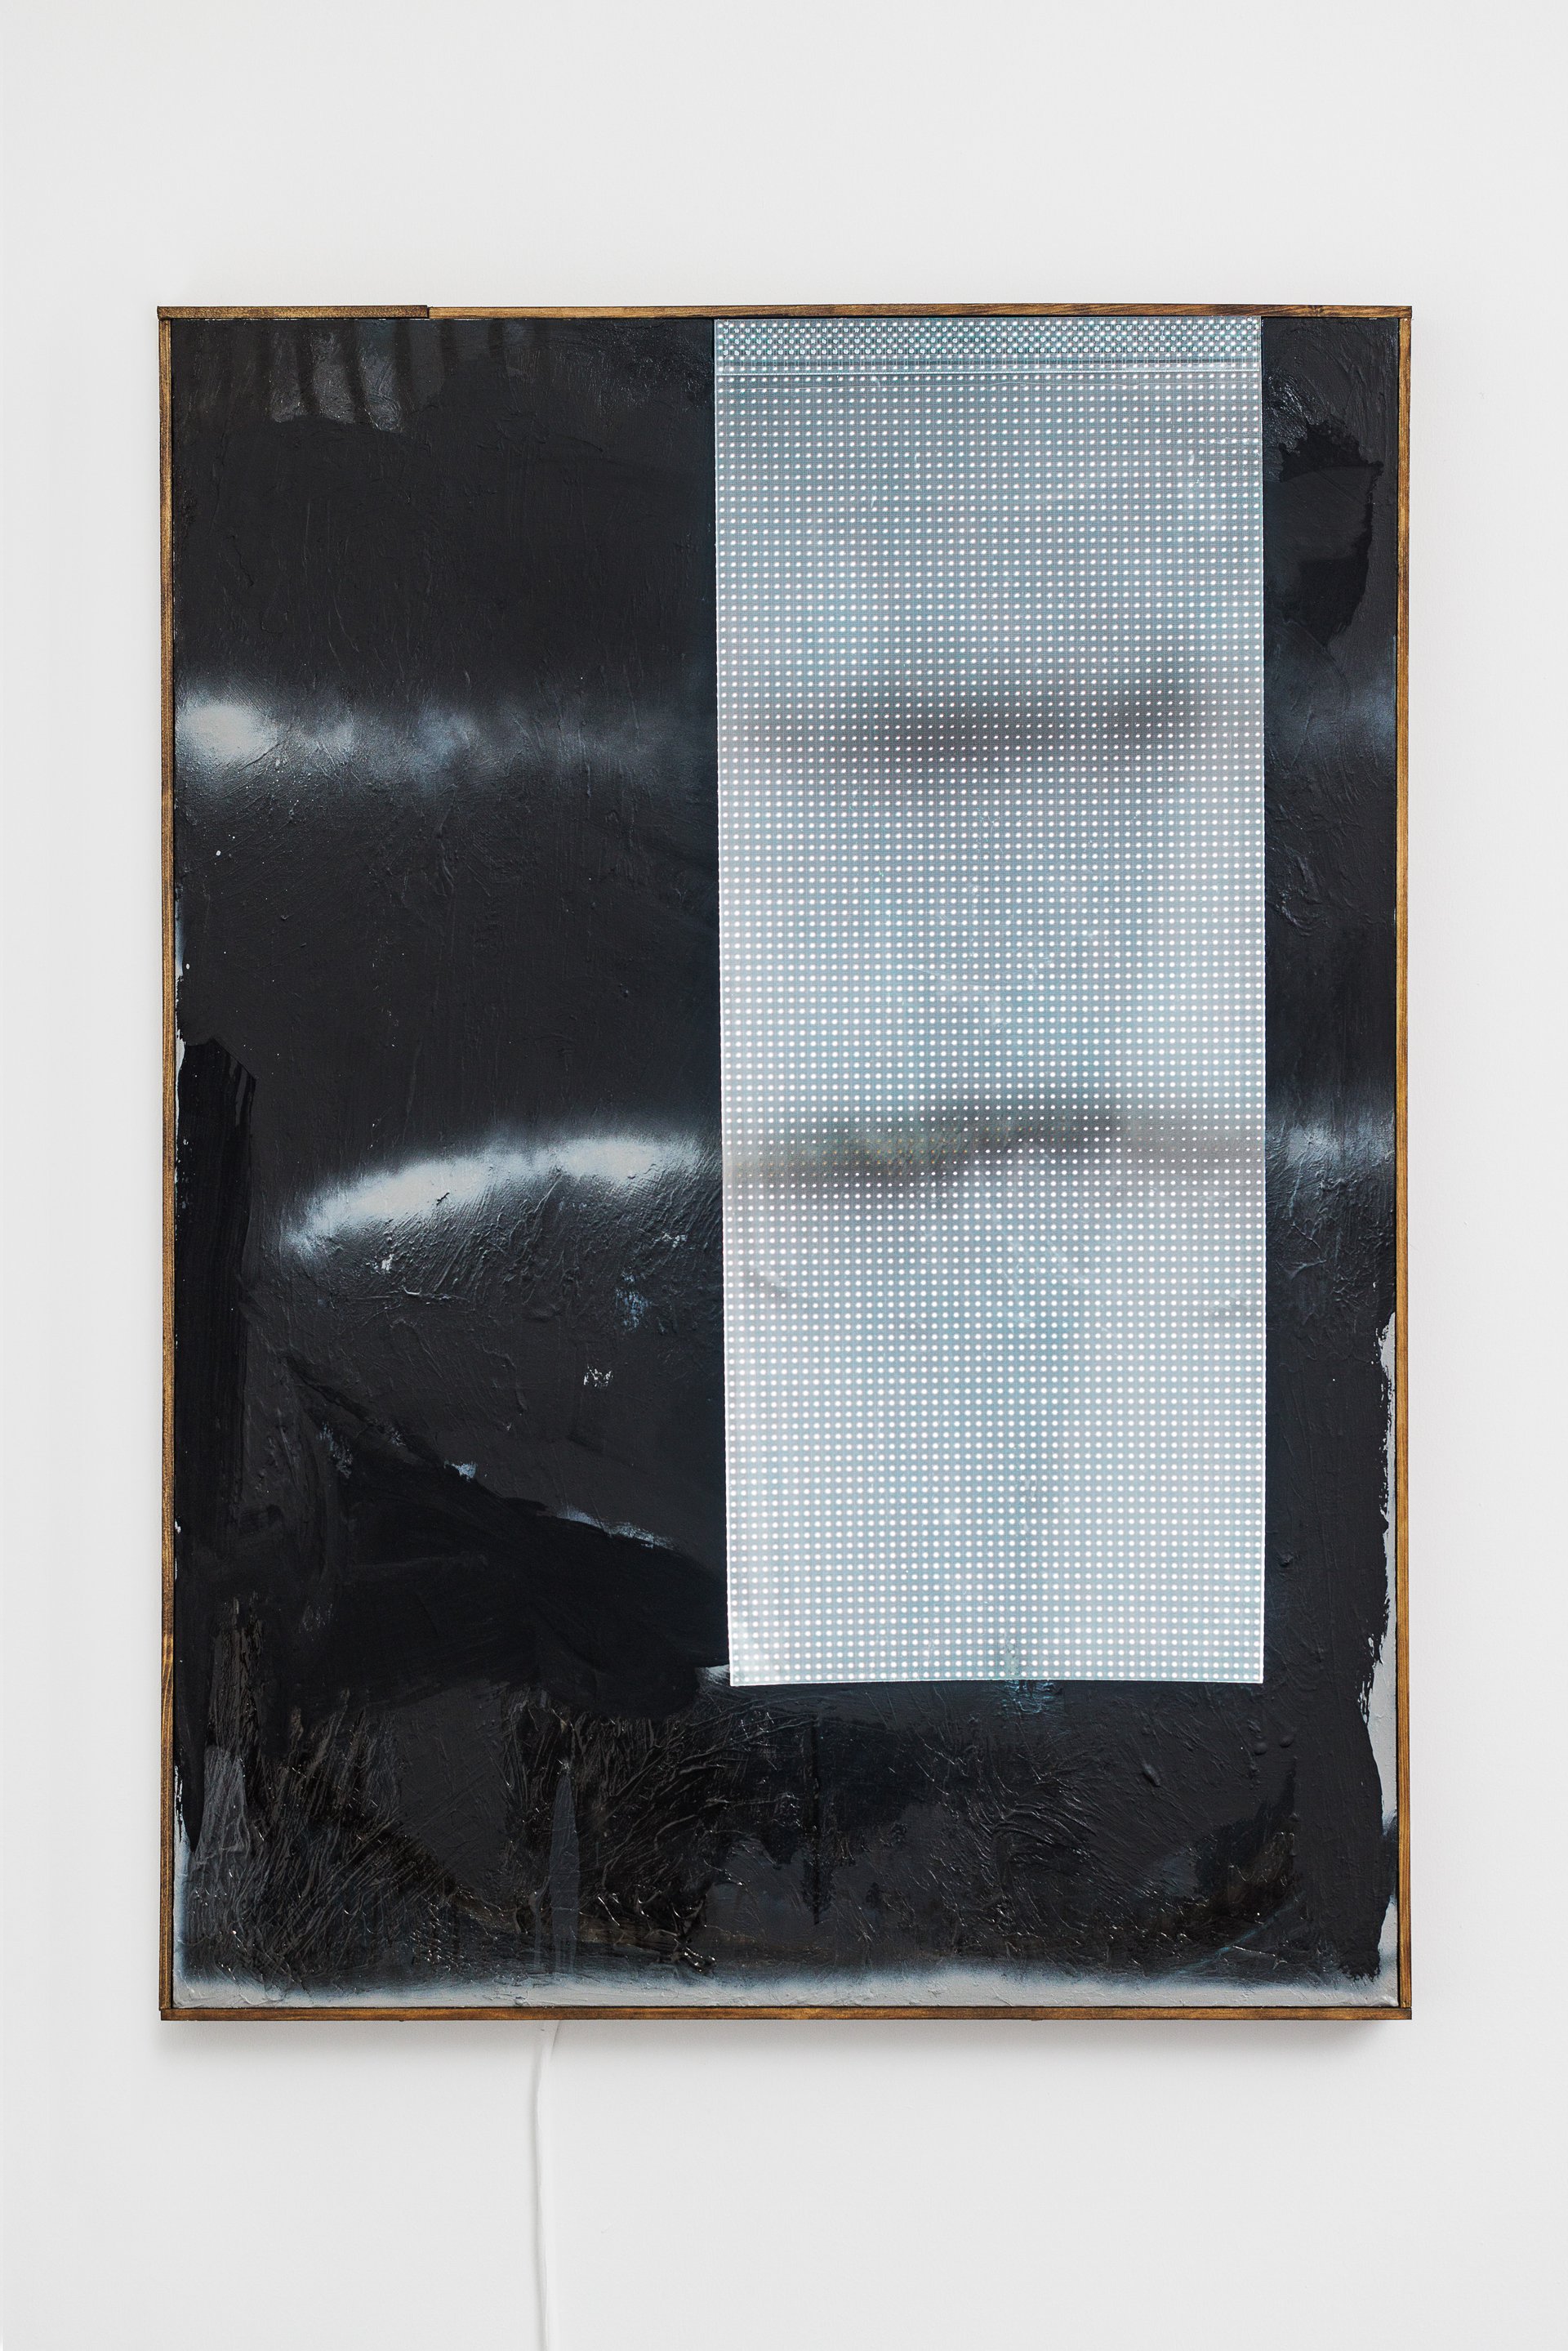 Philipp Timischl I need some sleep, 2023 Acrylic, oil and ink on canvas, transparent screen, media player, video 120 x 90 cm